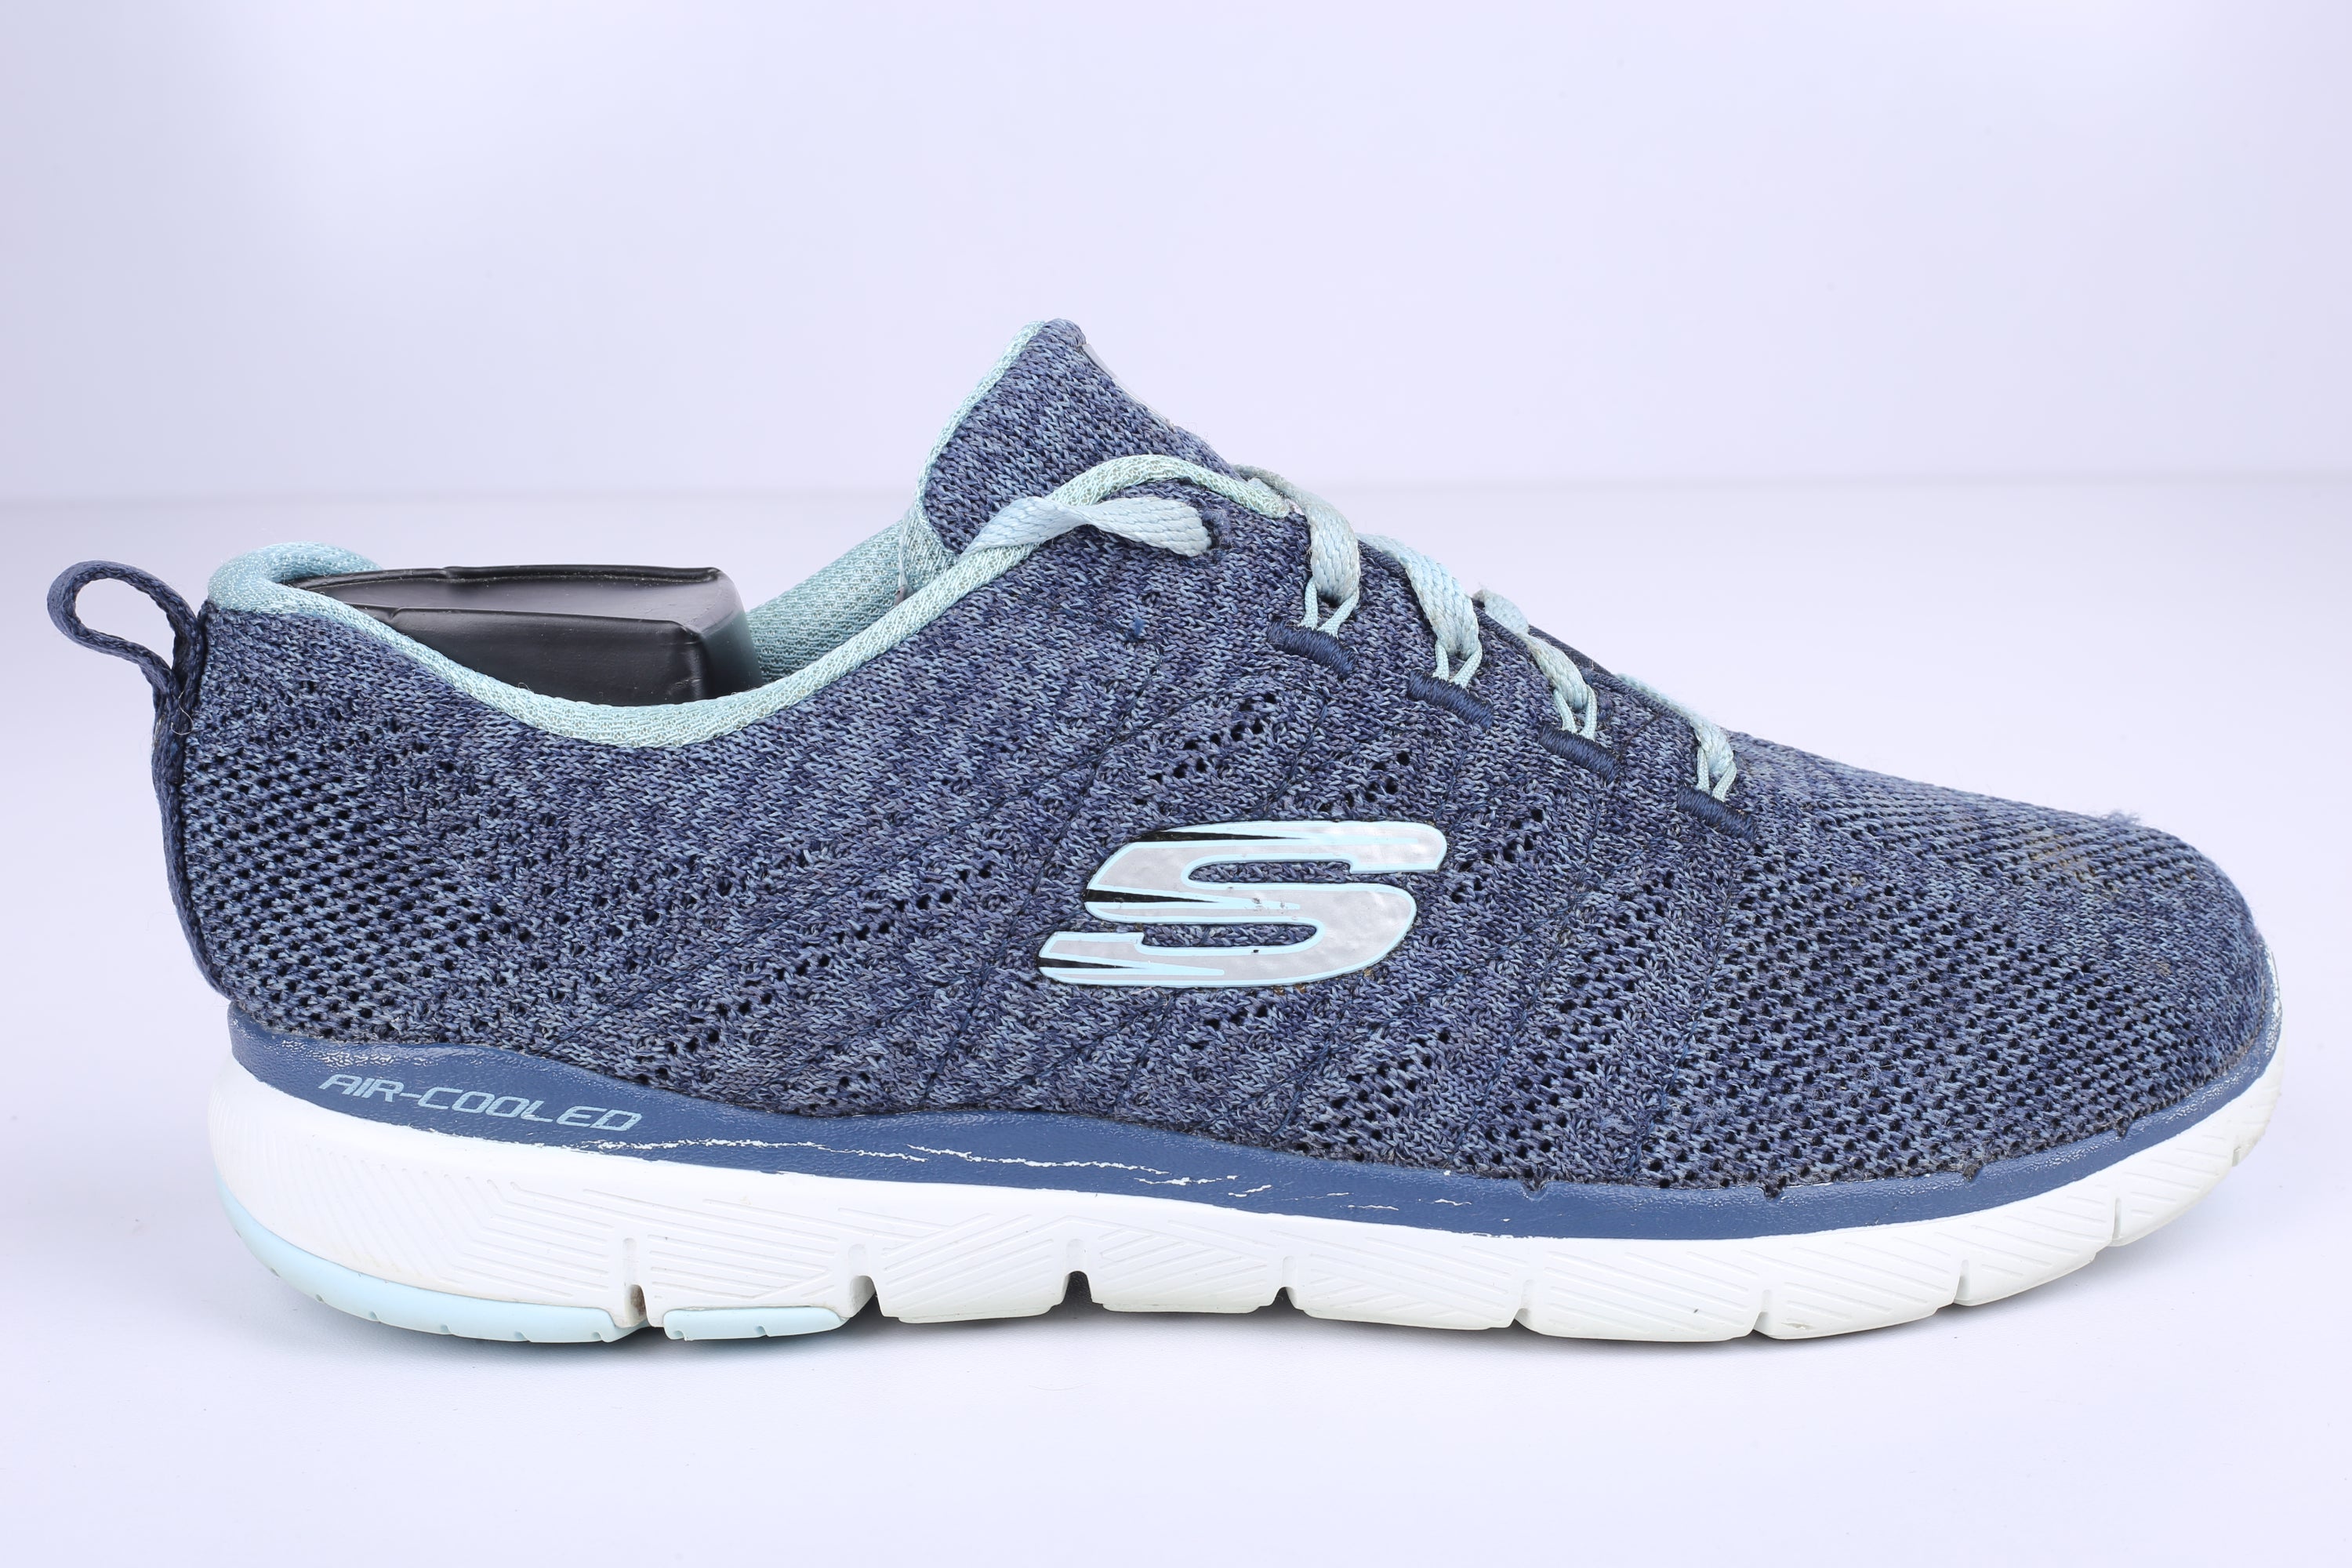 Skechers Skech-knit Running -(Condition Excellent)